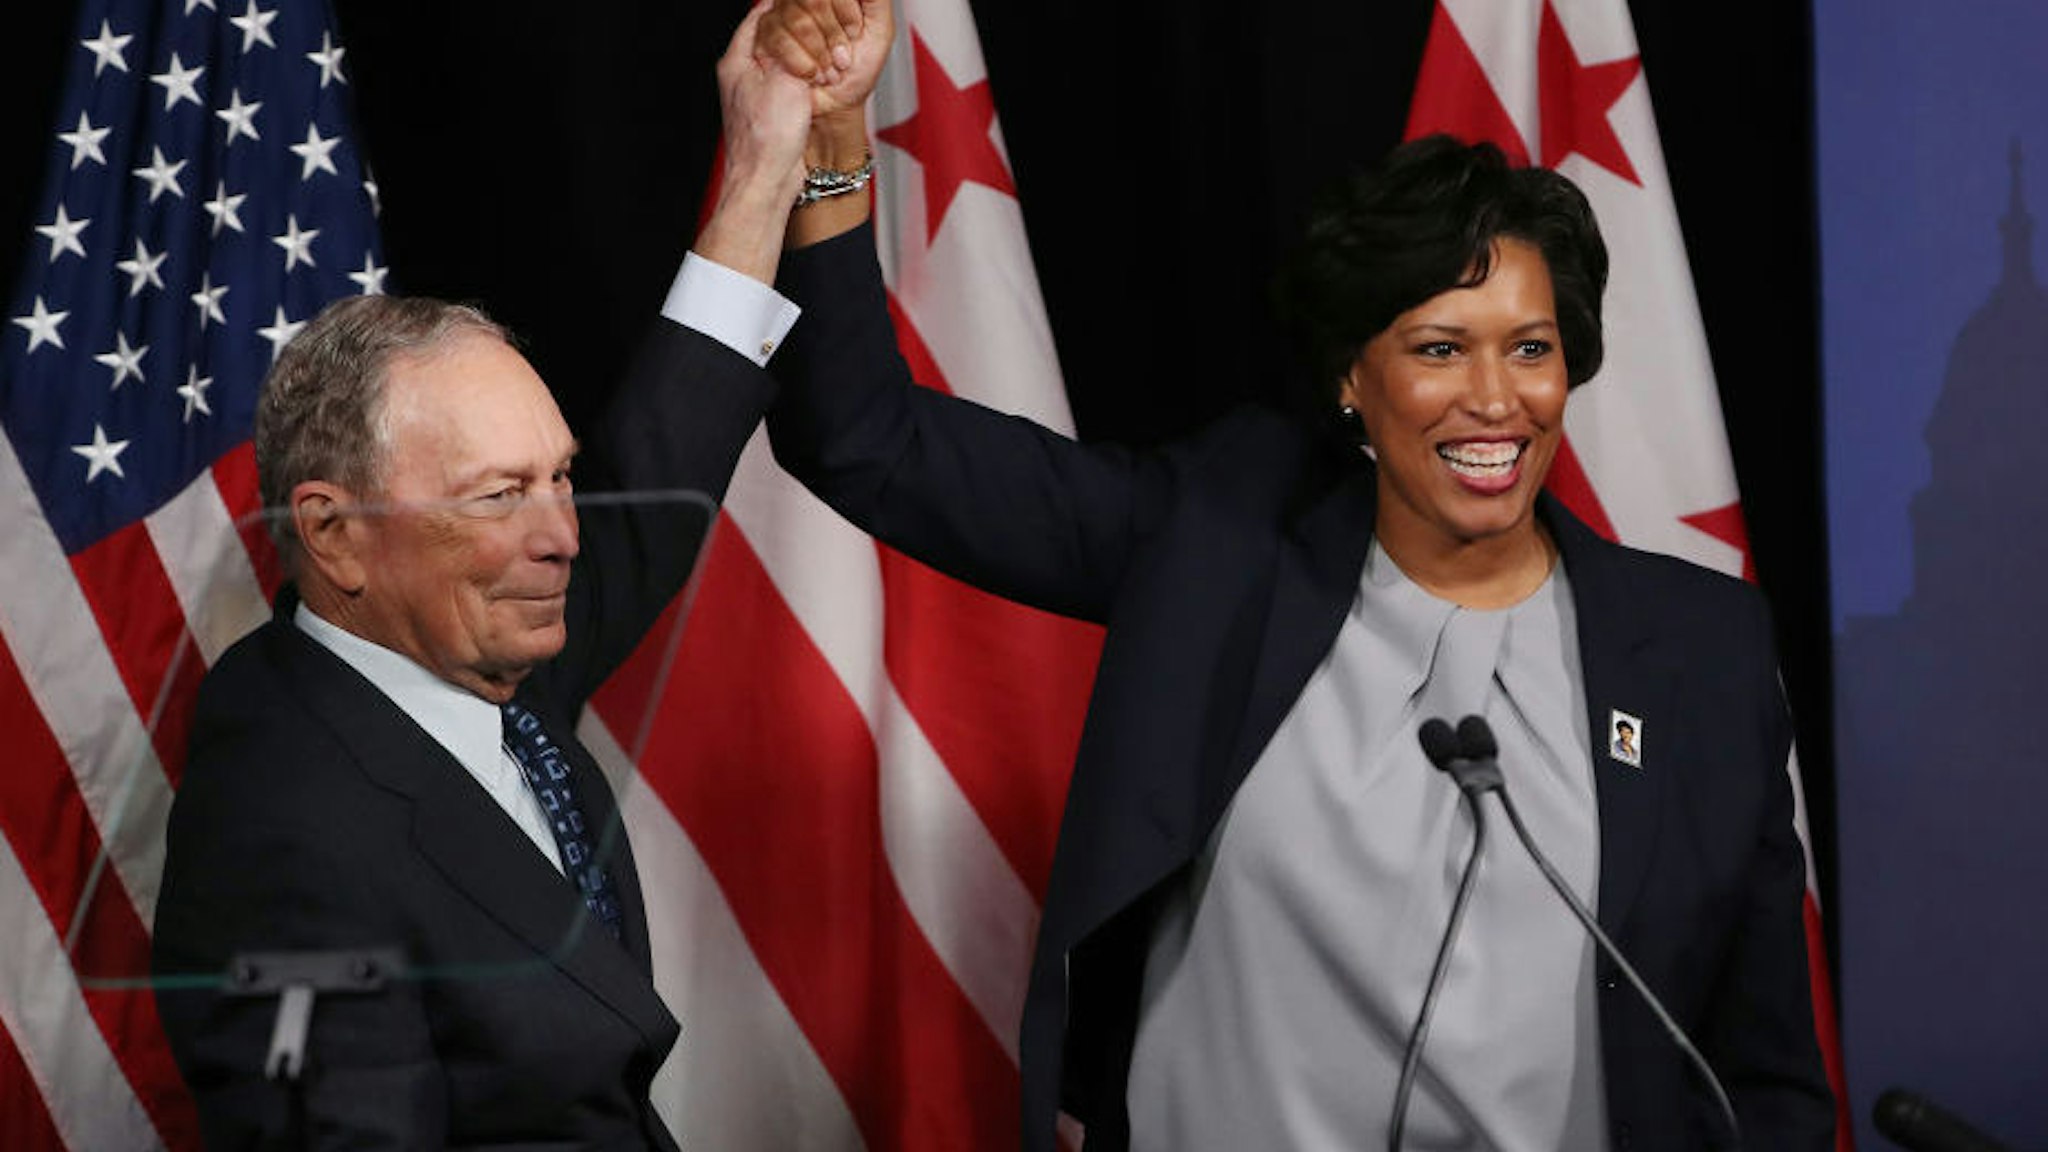 Democratic presidential candidate, former New York City Mayor Michael Bloomberg receives an endorsement from District of Columbia Mayor, Muriel Bowser during a campaign event where he spoke about affordable housing on January 30, 2020 in Washington, DC. The first-in-the-nation Iowa caucuses will be held February 3. (Photo by Mark Wilson/Getty Images)